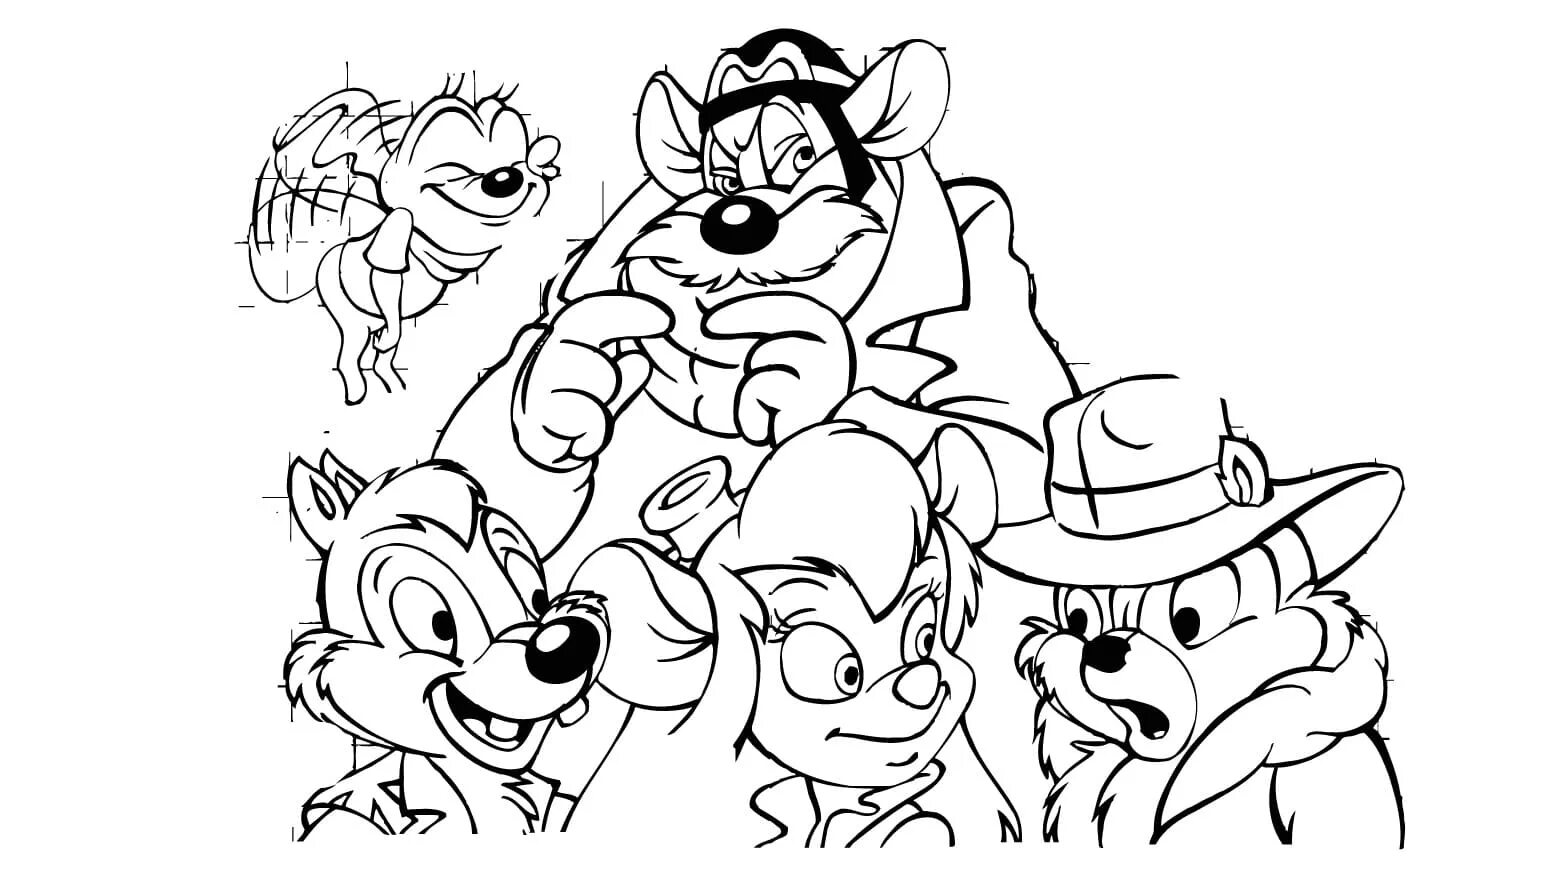 Chip and Dale fun coloring book for kids